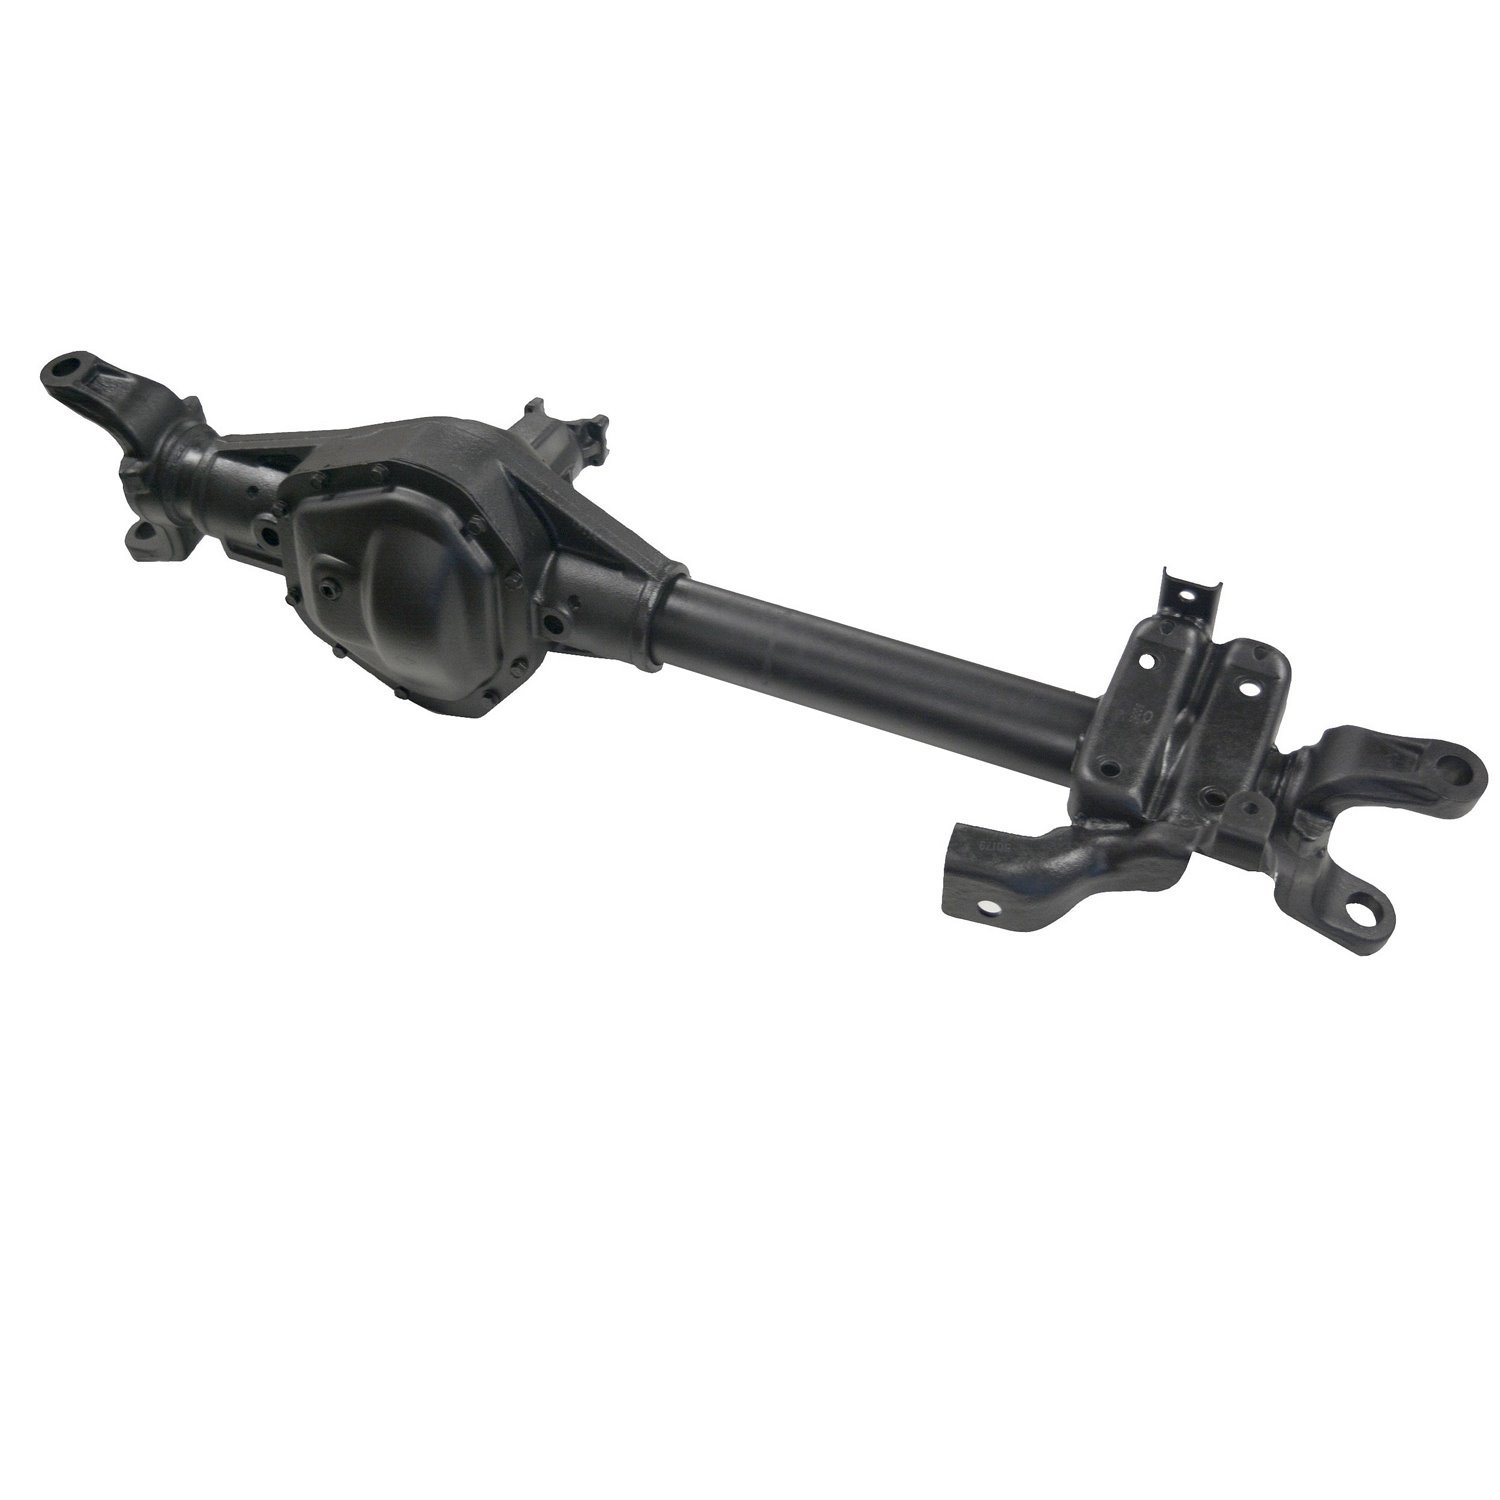 Remanufactured Complete Axle Assembly for Dana 50 99-01 F250 & F350 3.73 , SRW, Rear ABS